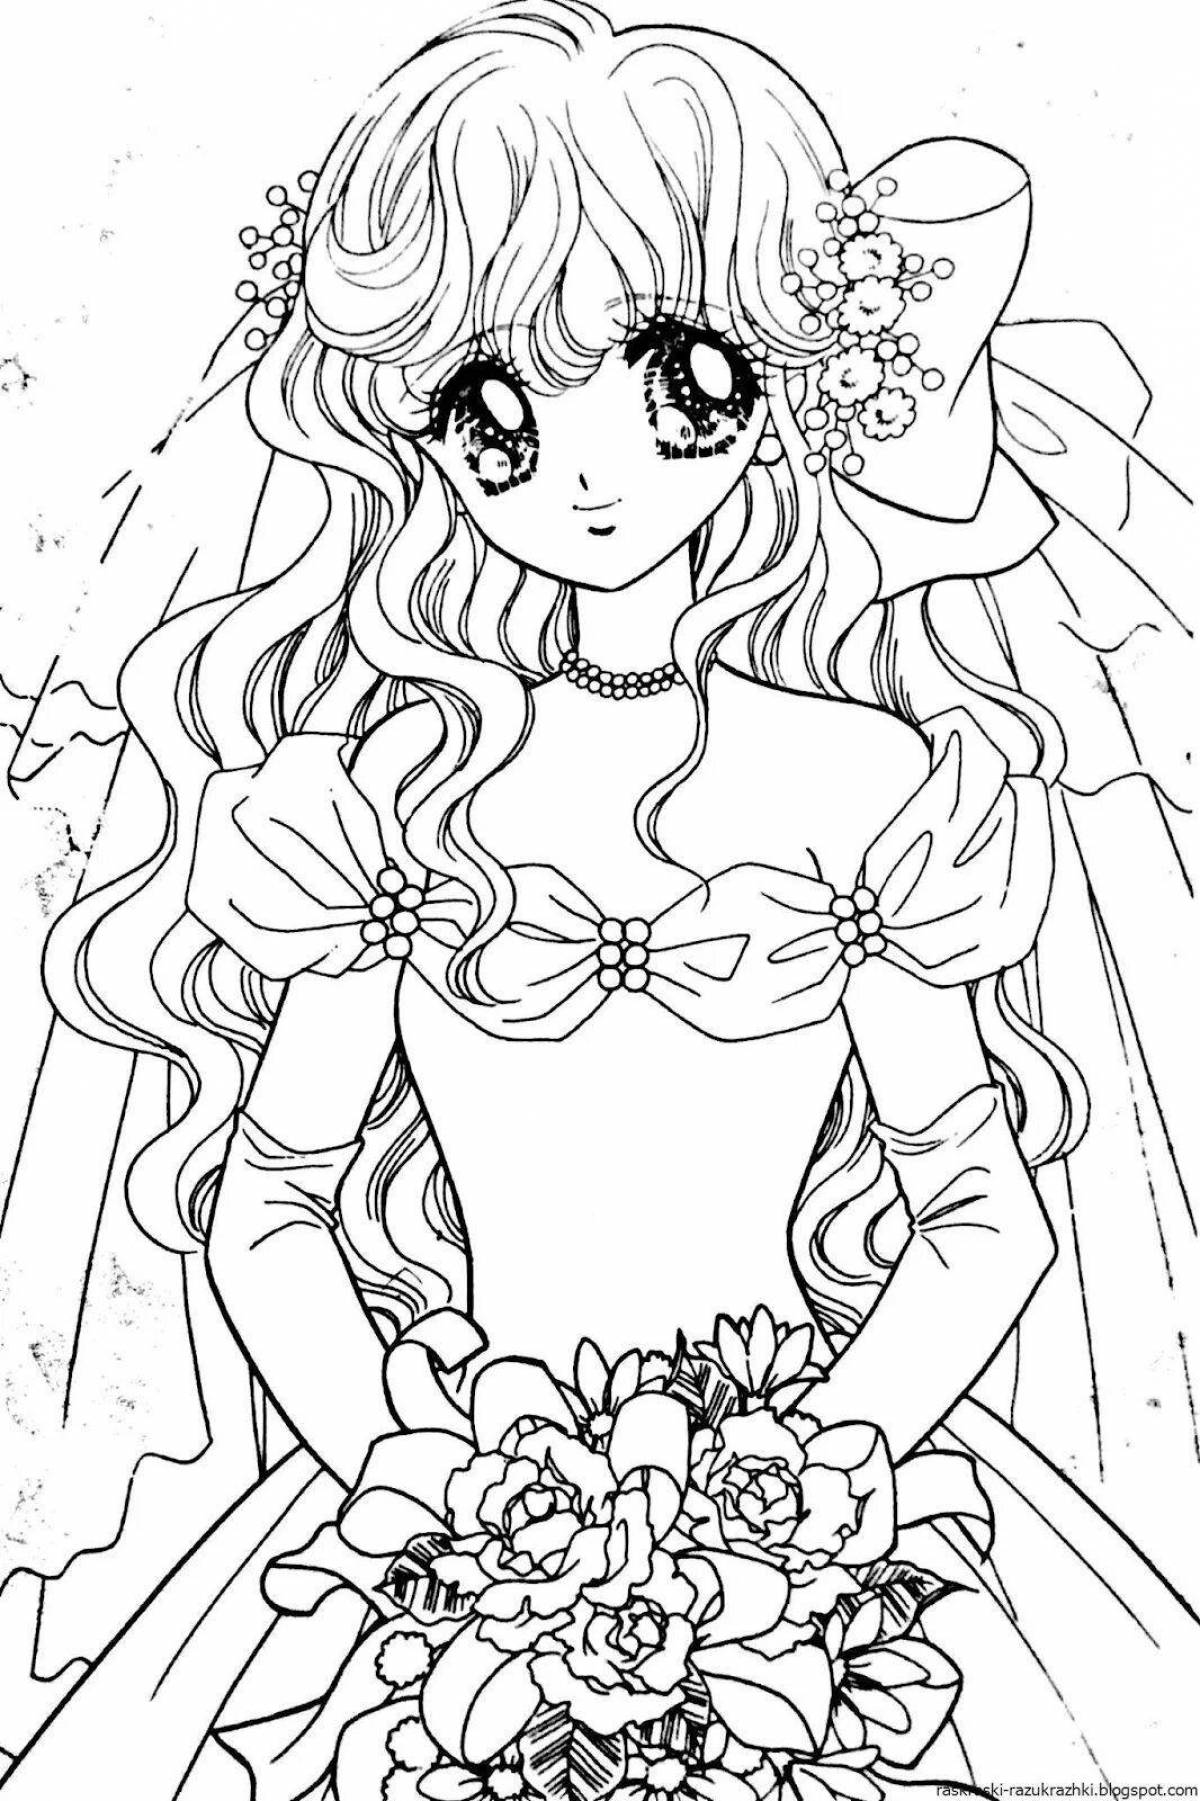 Radiant 15 years anime girls coloring page